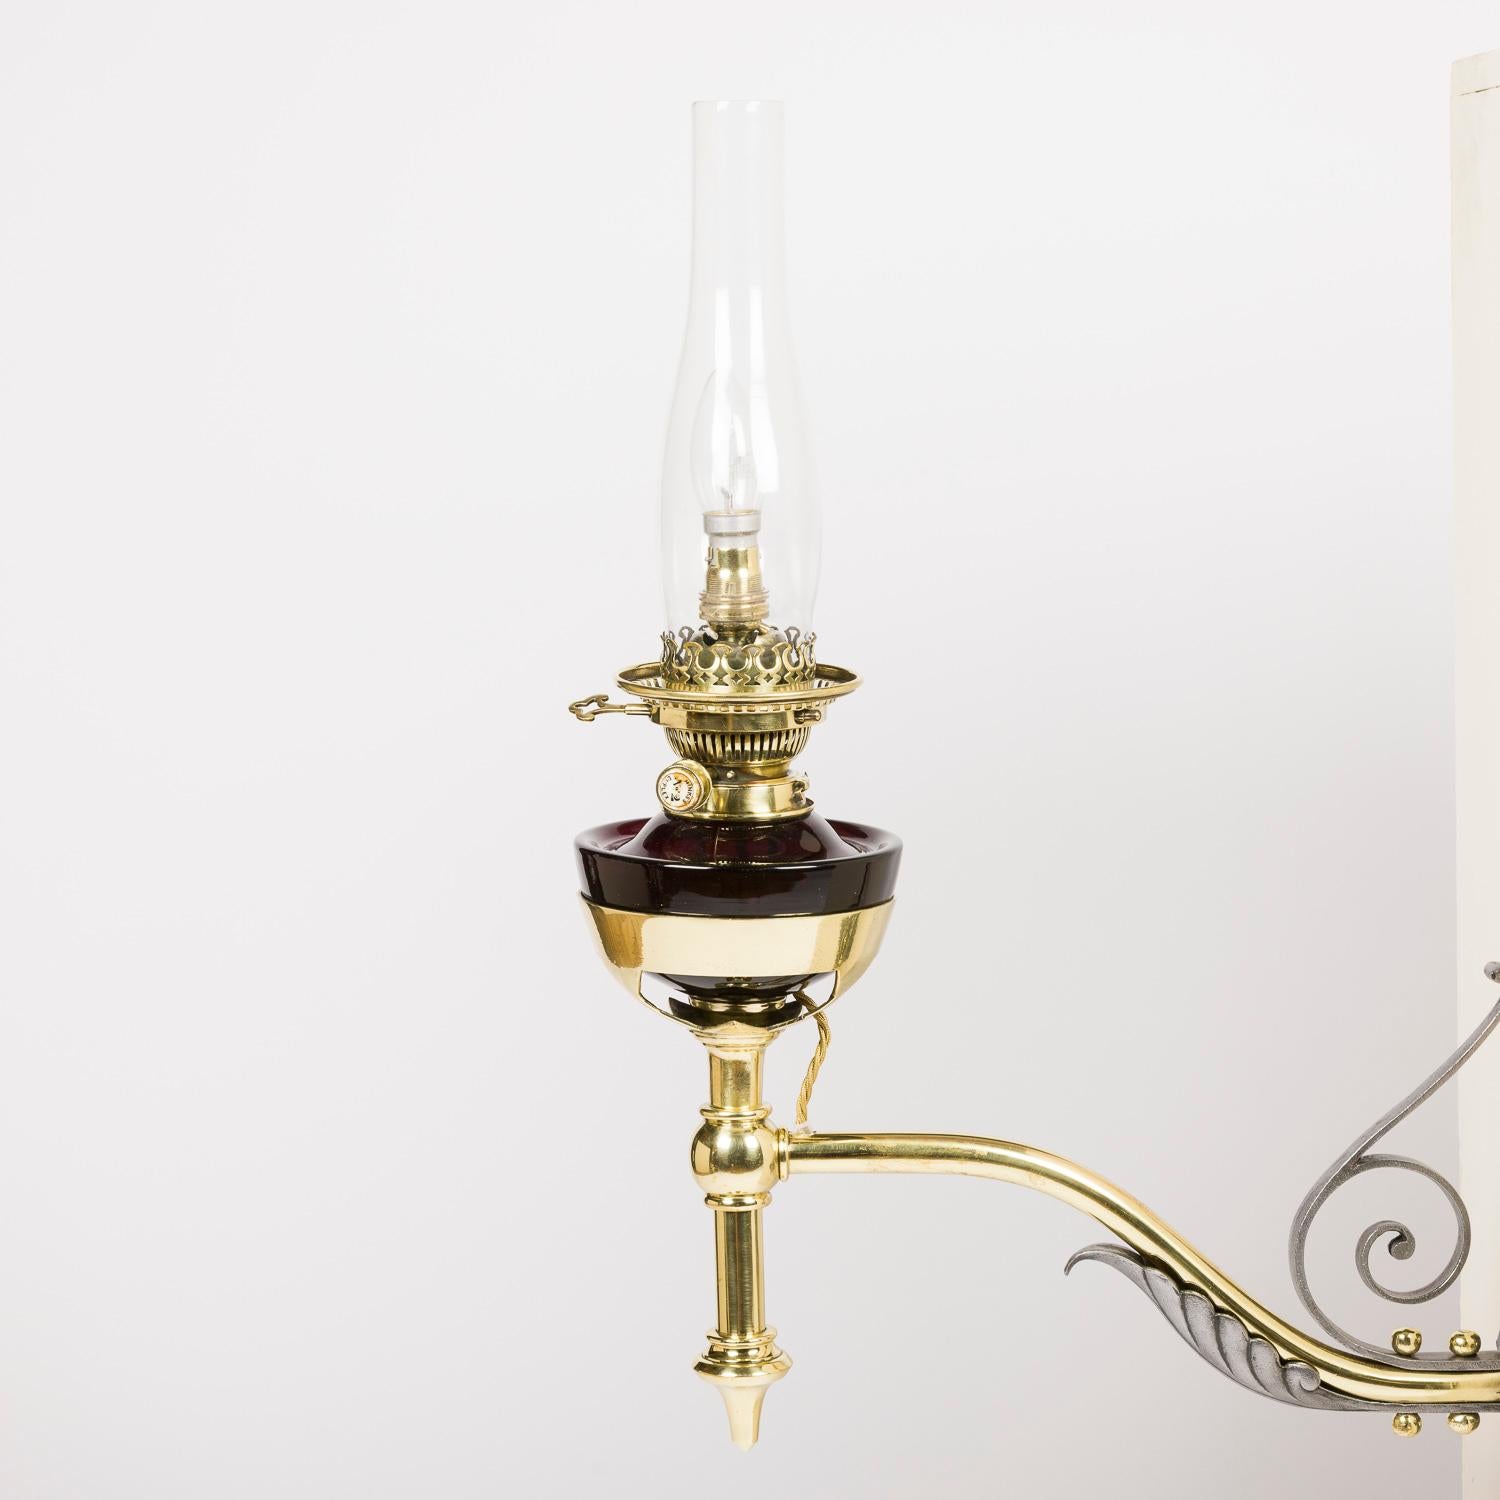 A Victorian wall mounted oil lamp, converted to electricity, with purple glass and brass lamp, brass and iron bracket, with a clear glass chimney. Circa 1890.

Brass burner marked: HINKS DUPLEX No 2. HINKS & SON'S PATENT Rd 65891

A Victorian wall